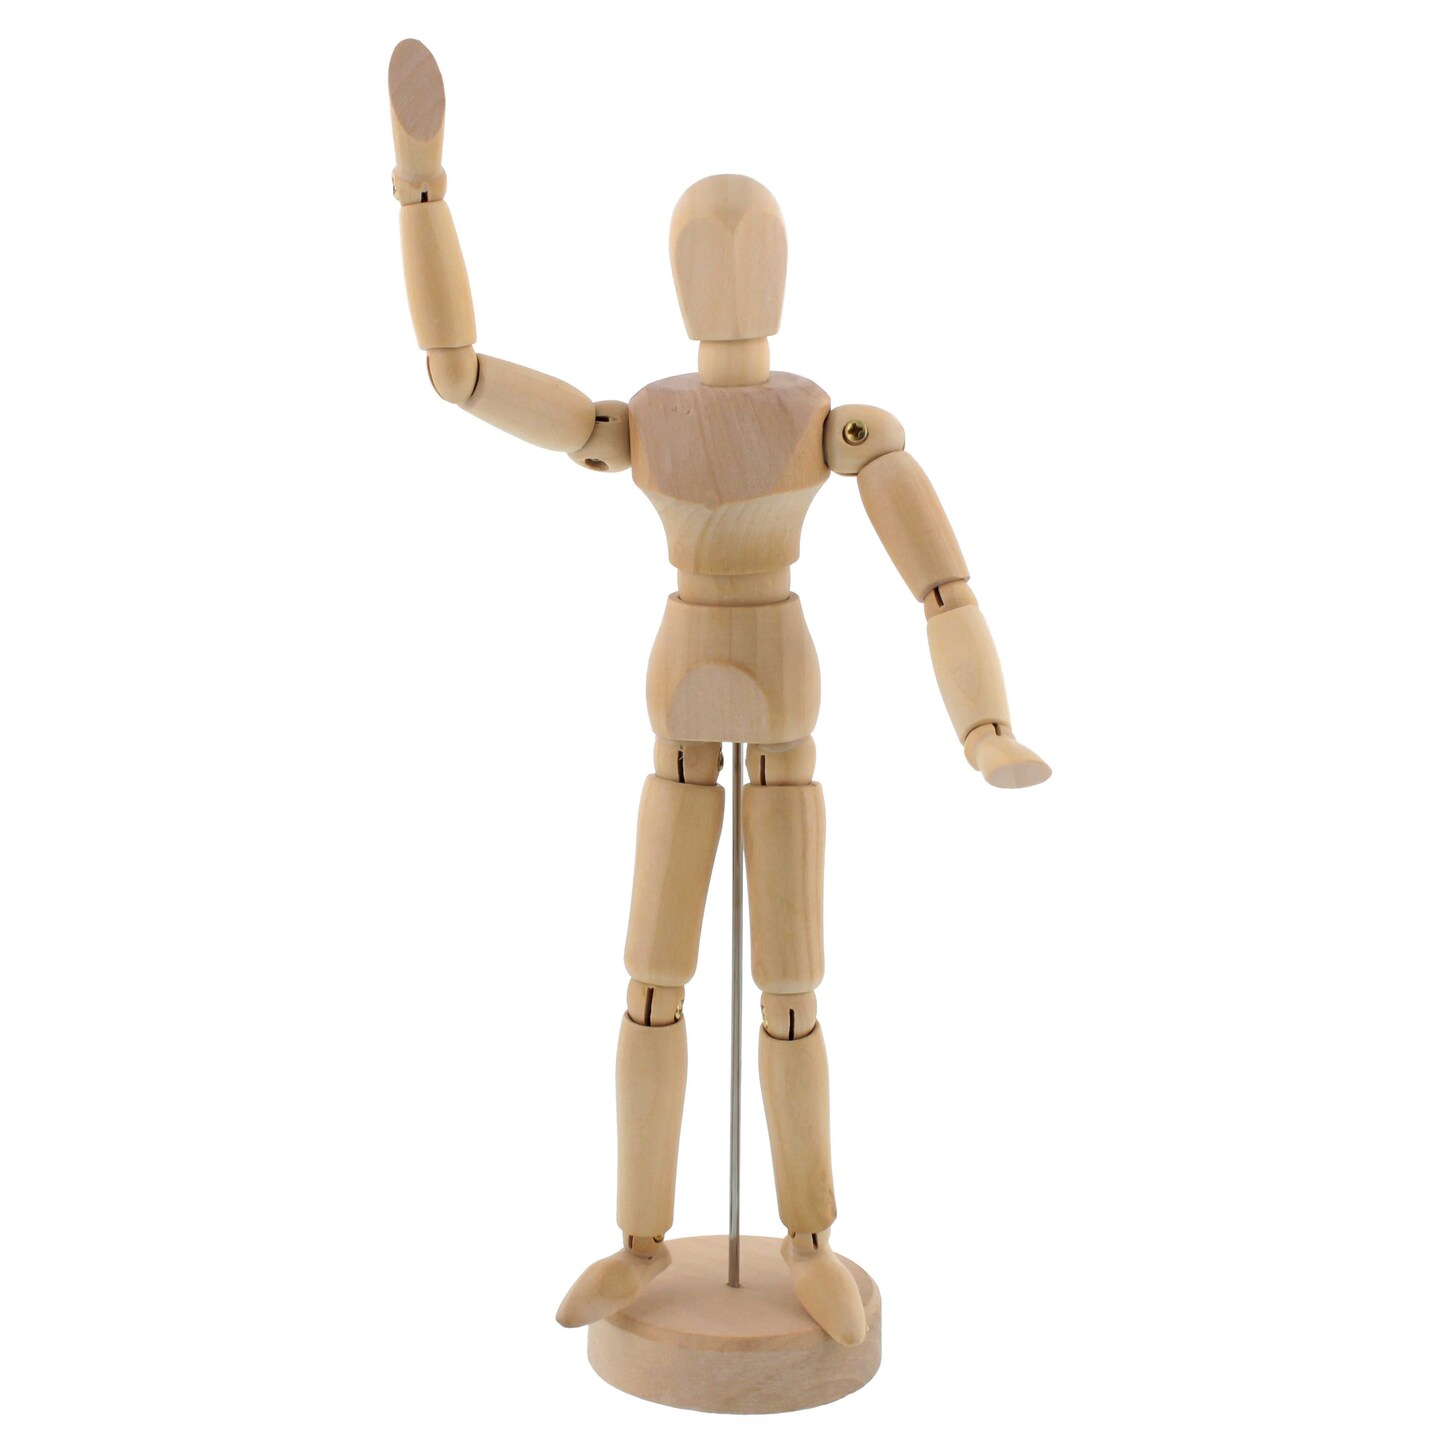 Wooden Doll Model Drawing, Wooden Model Human Mannequin